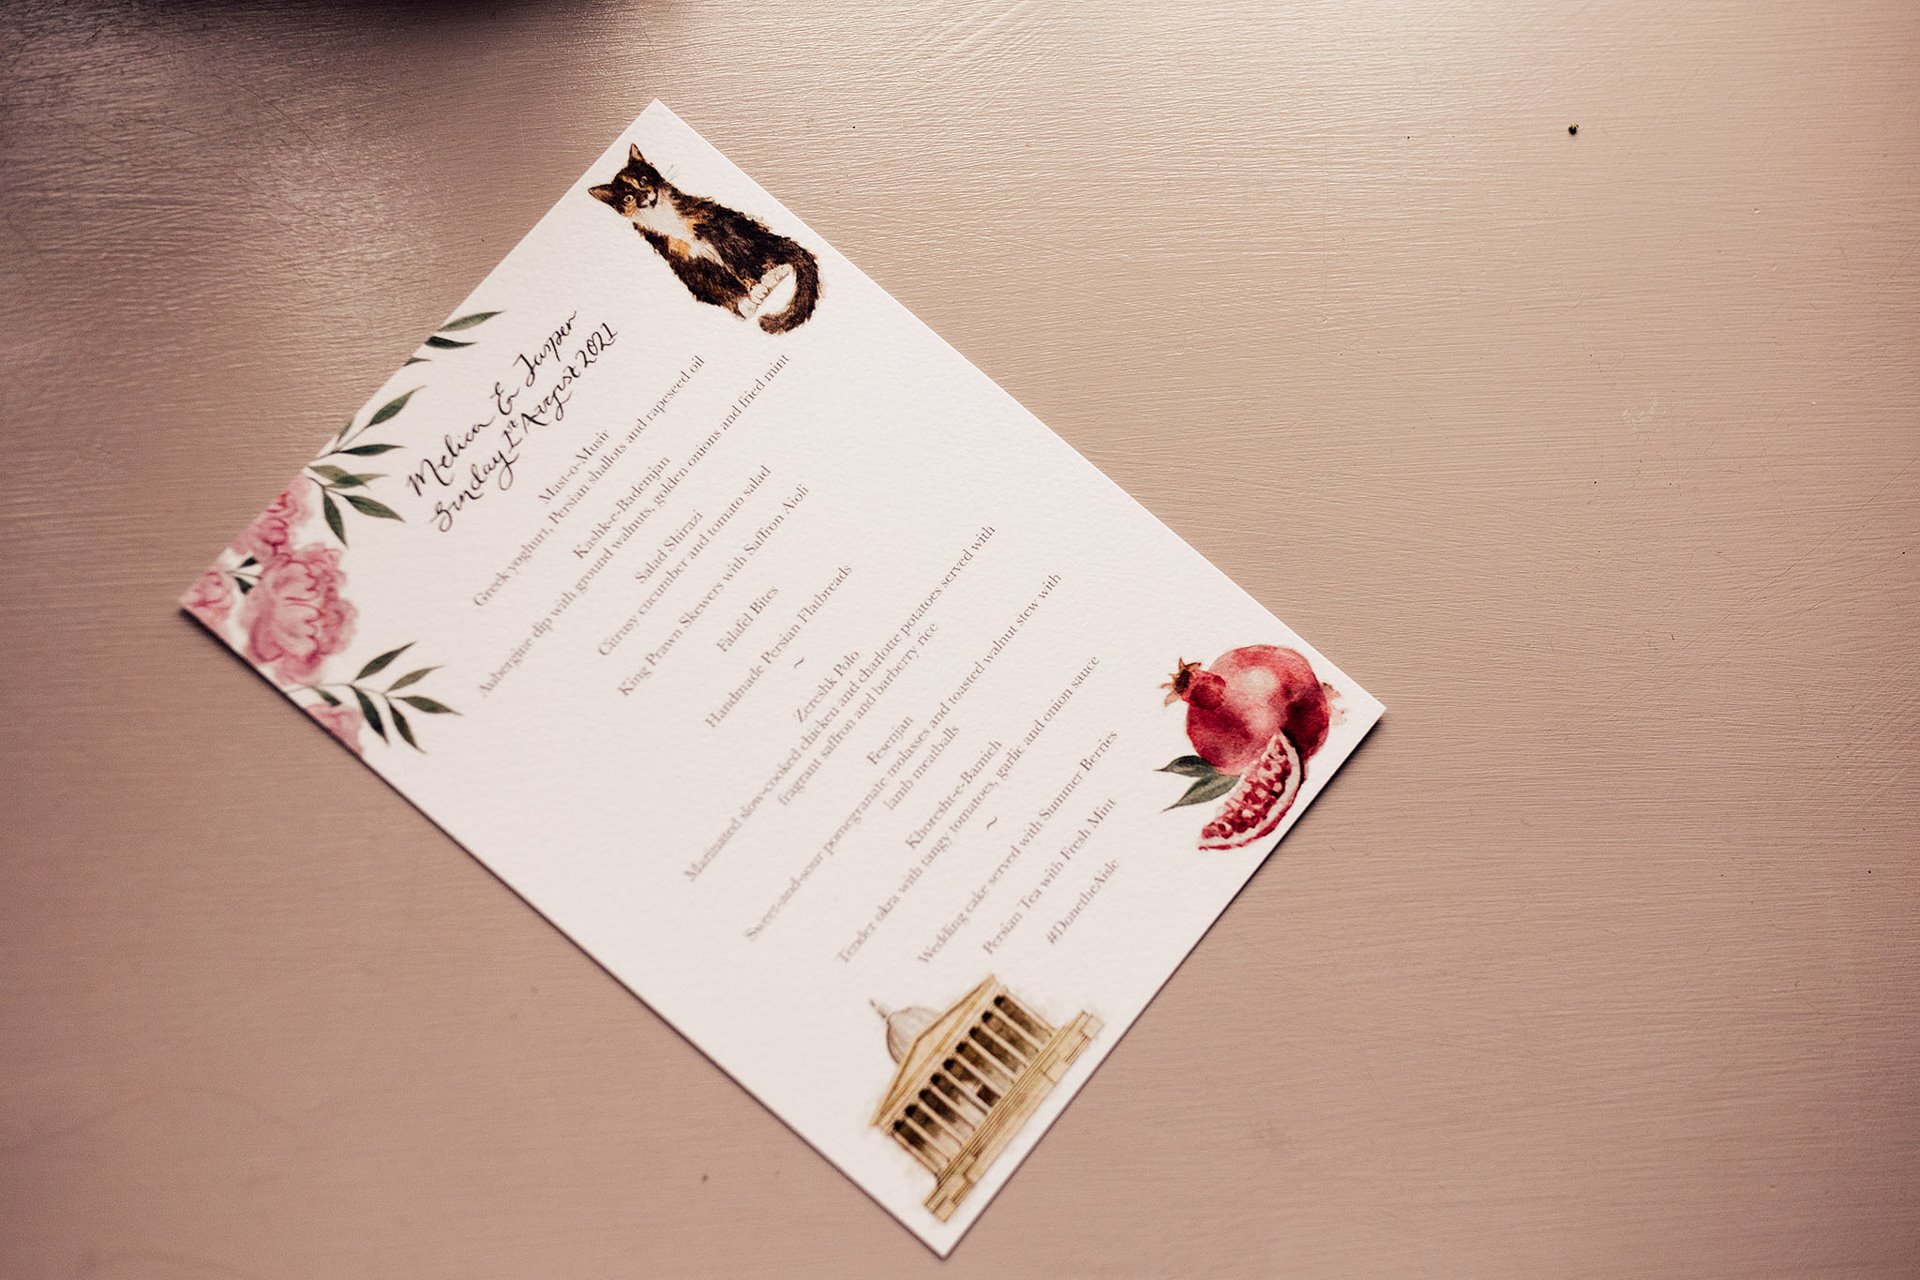 DIY wedding stationary made by the bride herself